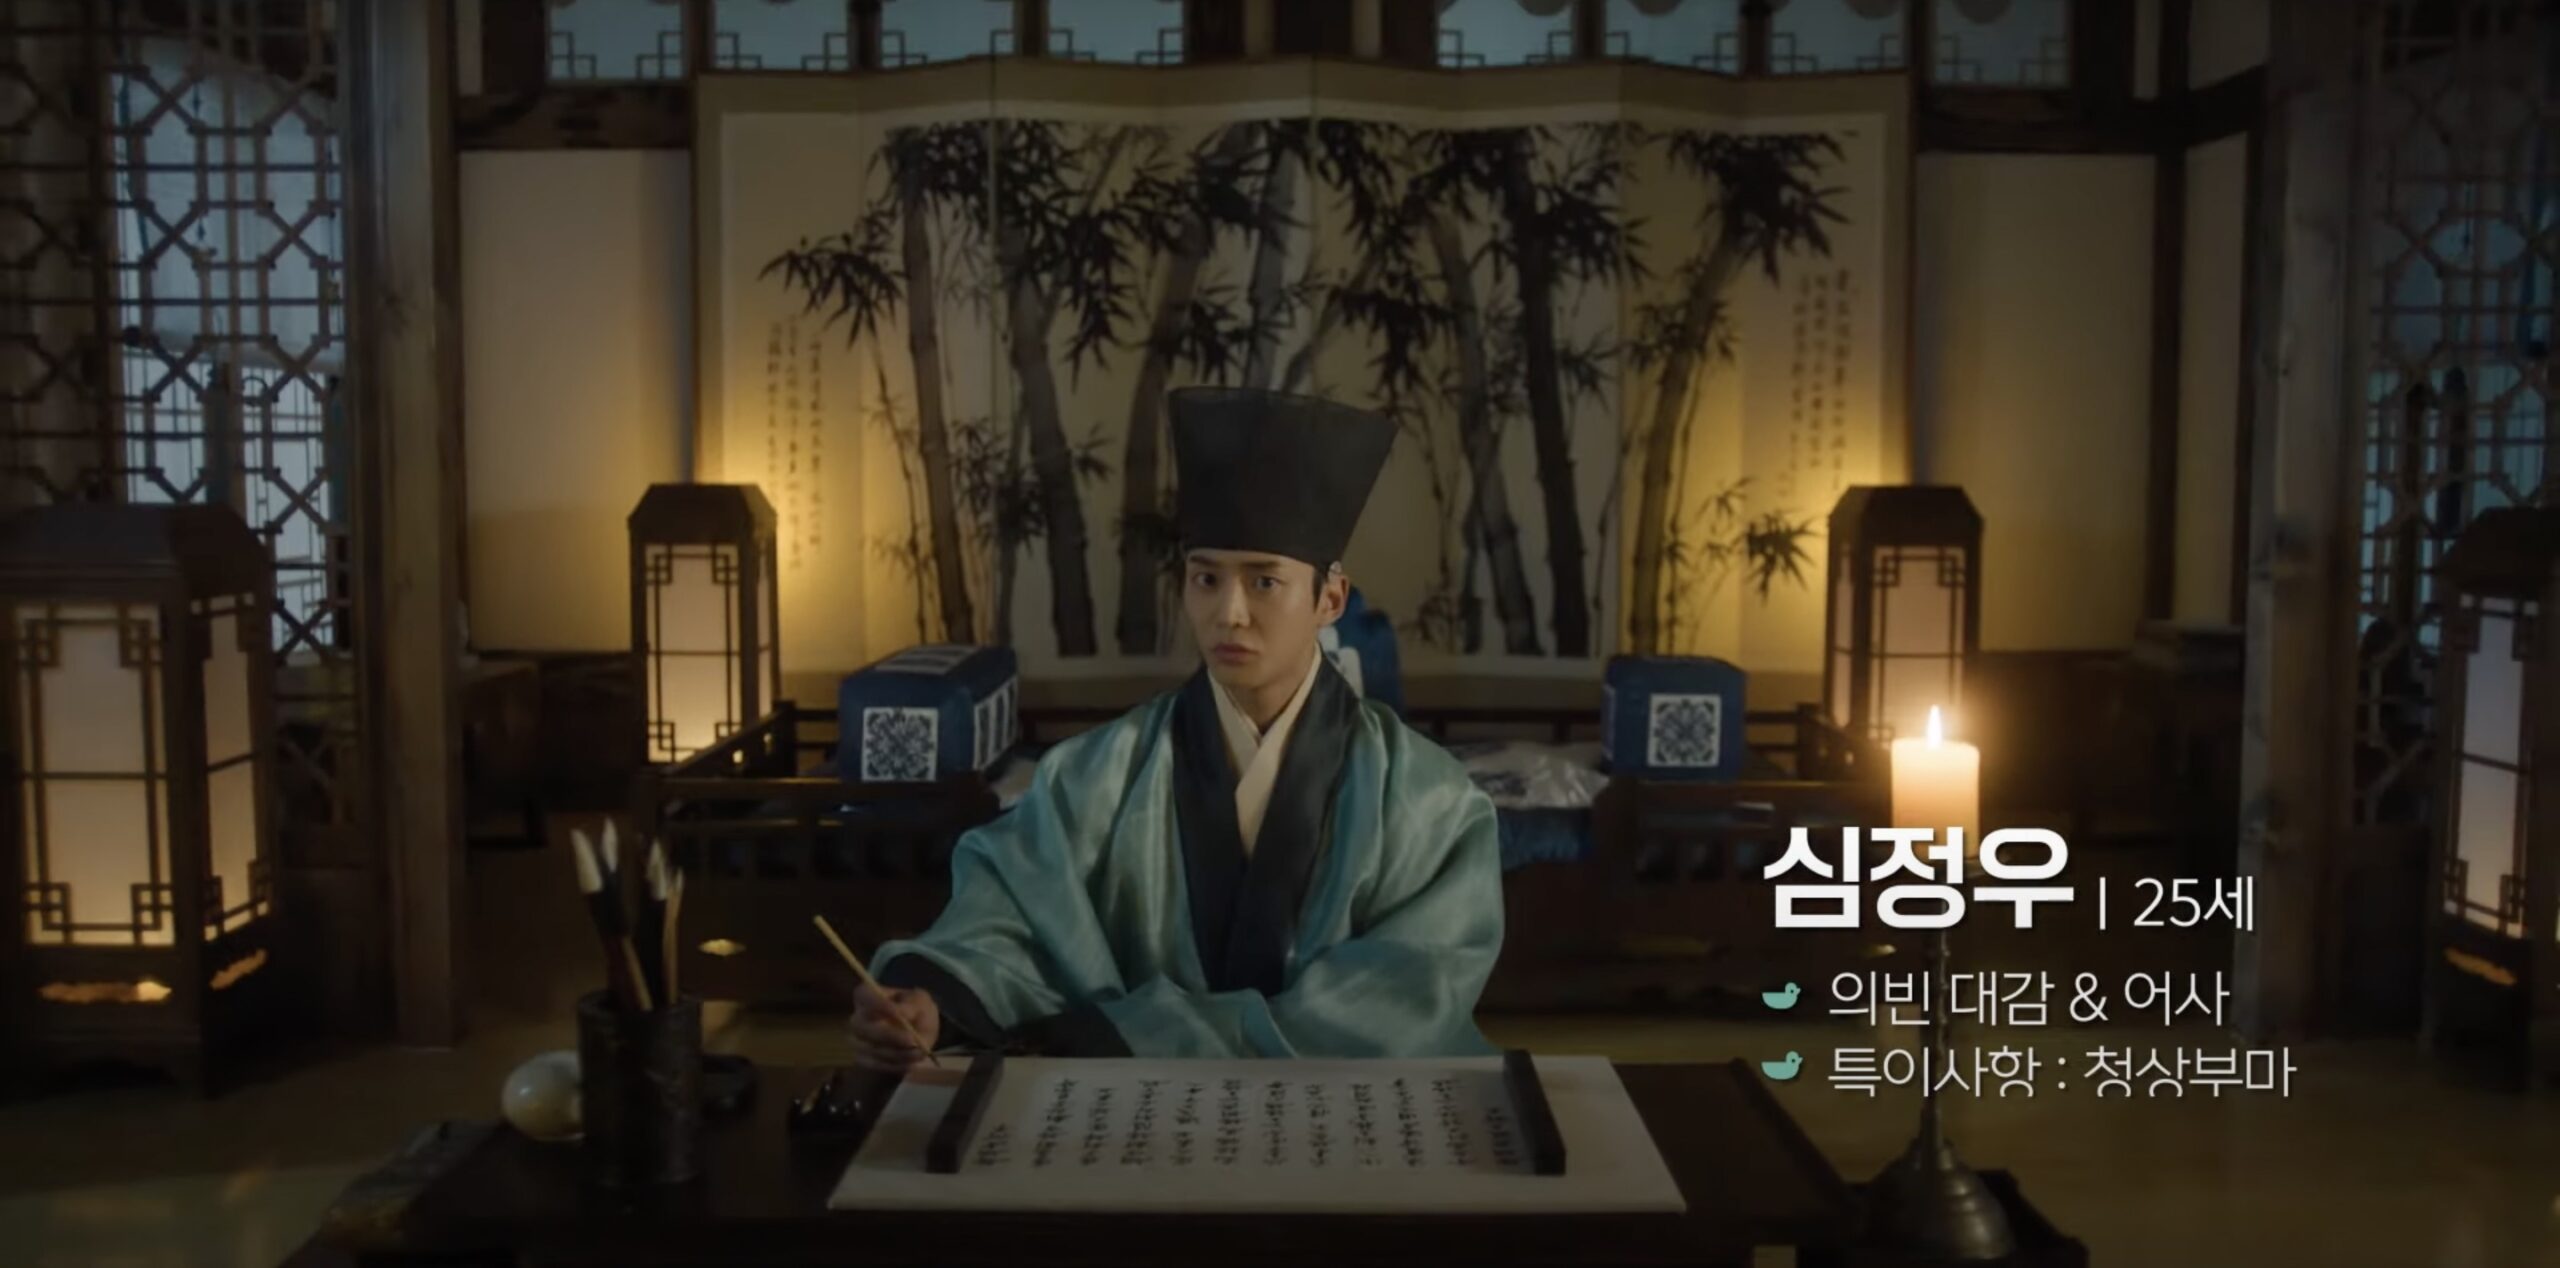 Kim Ro-woon requests a marriage annulment in new teaser